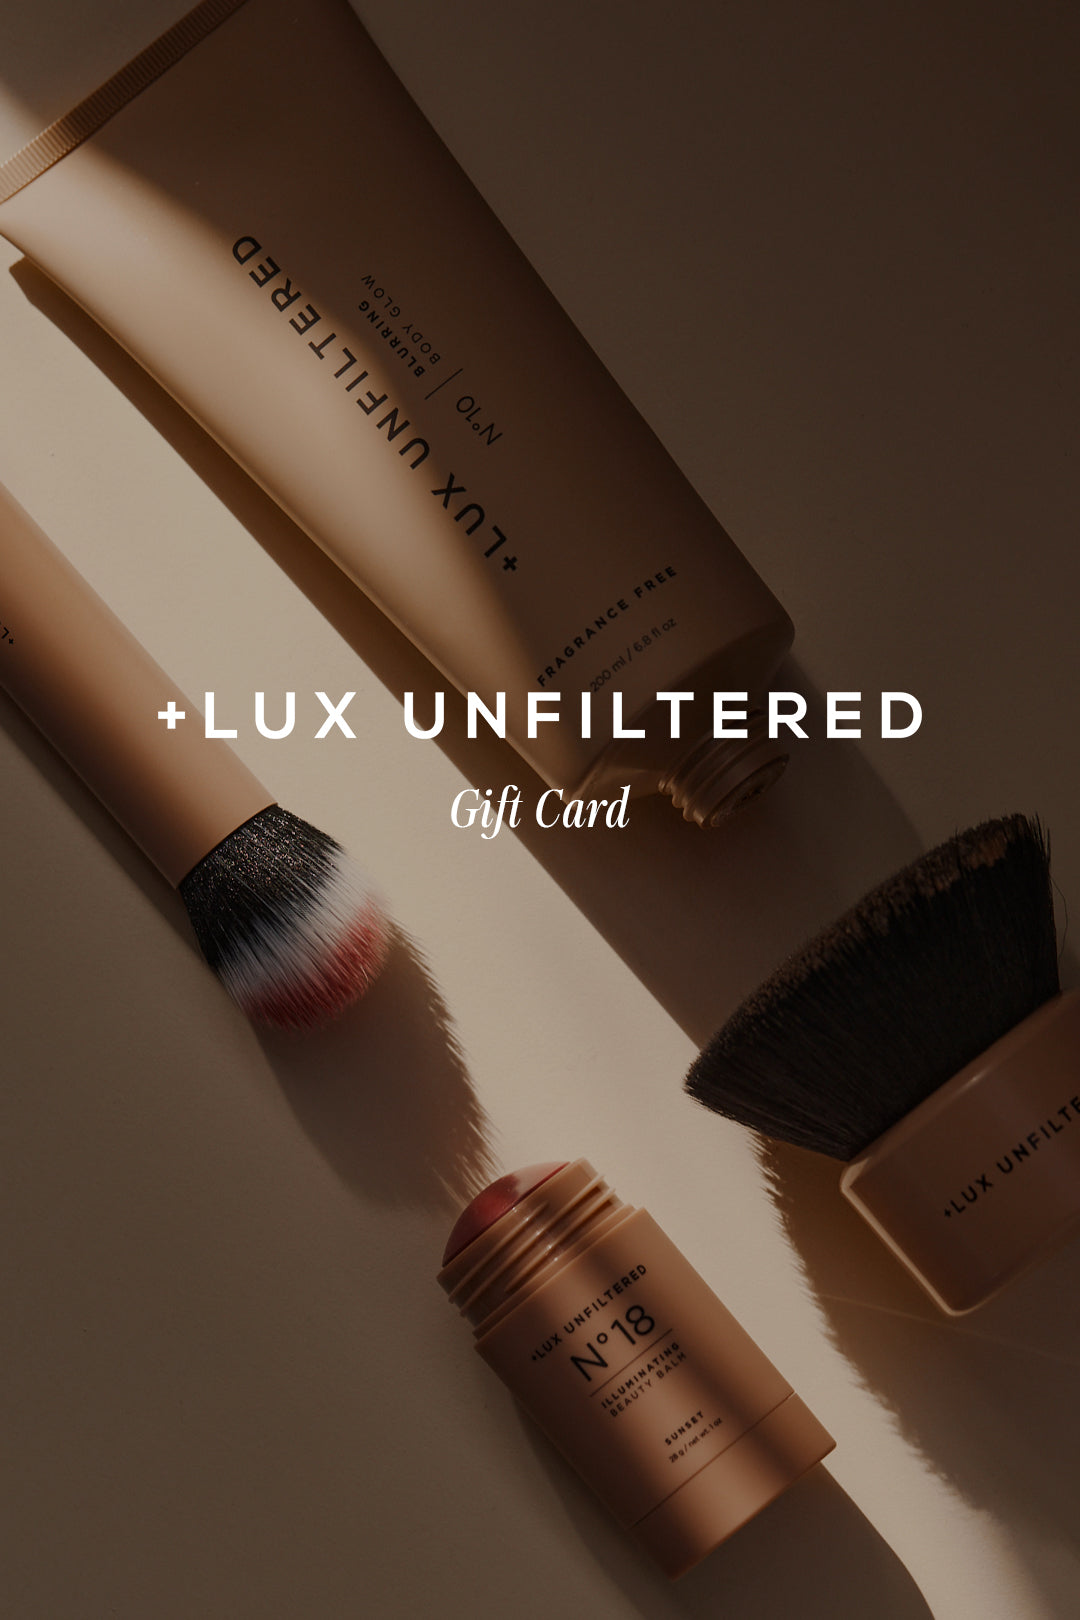 Gift Card - + LUX UNFILTERED